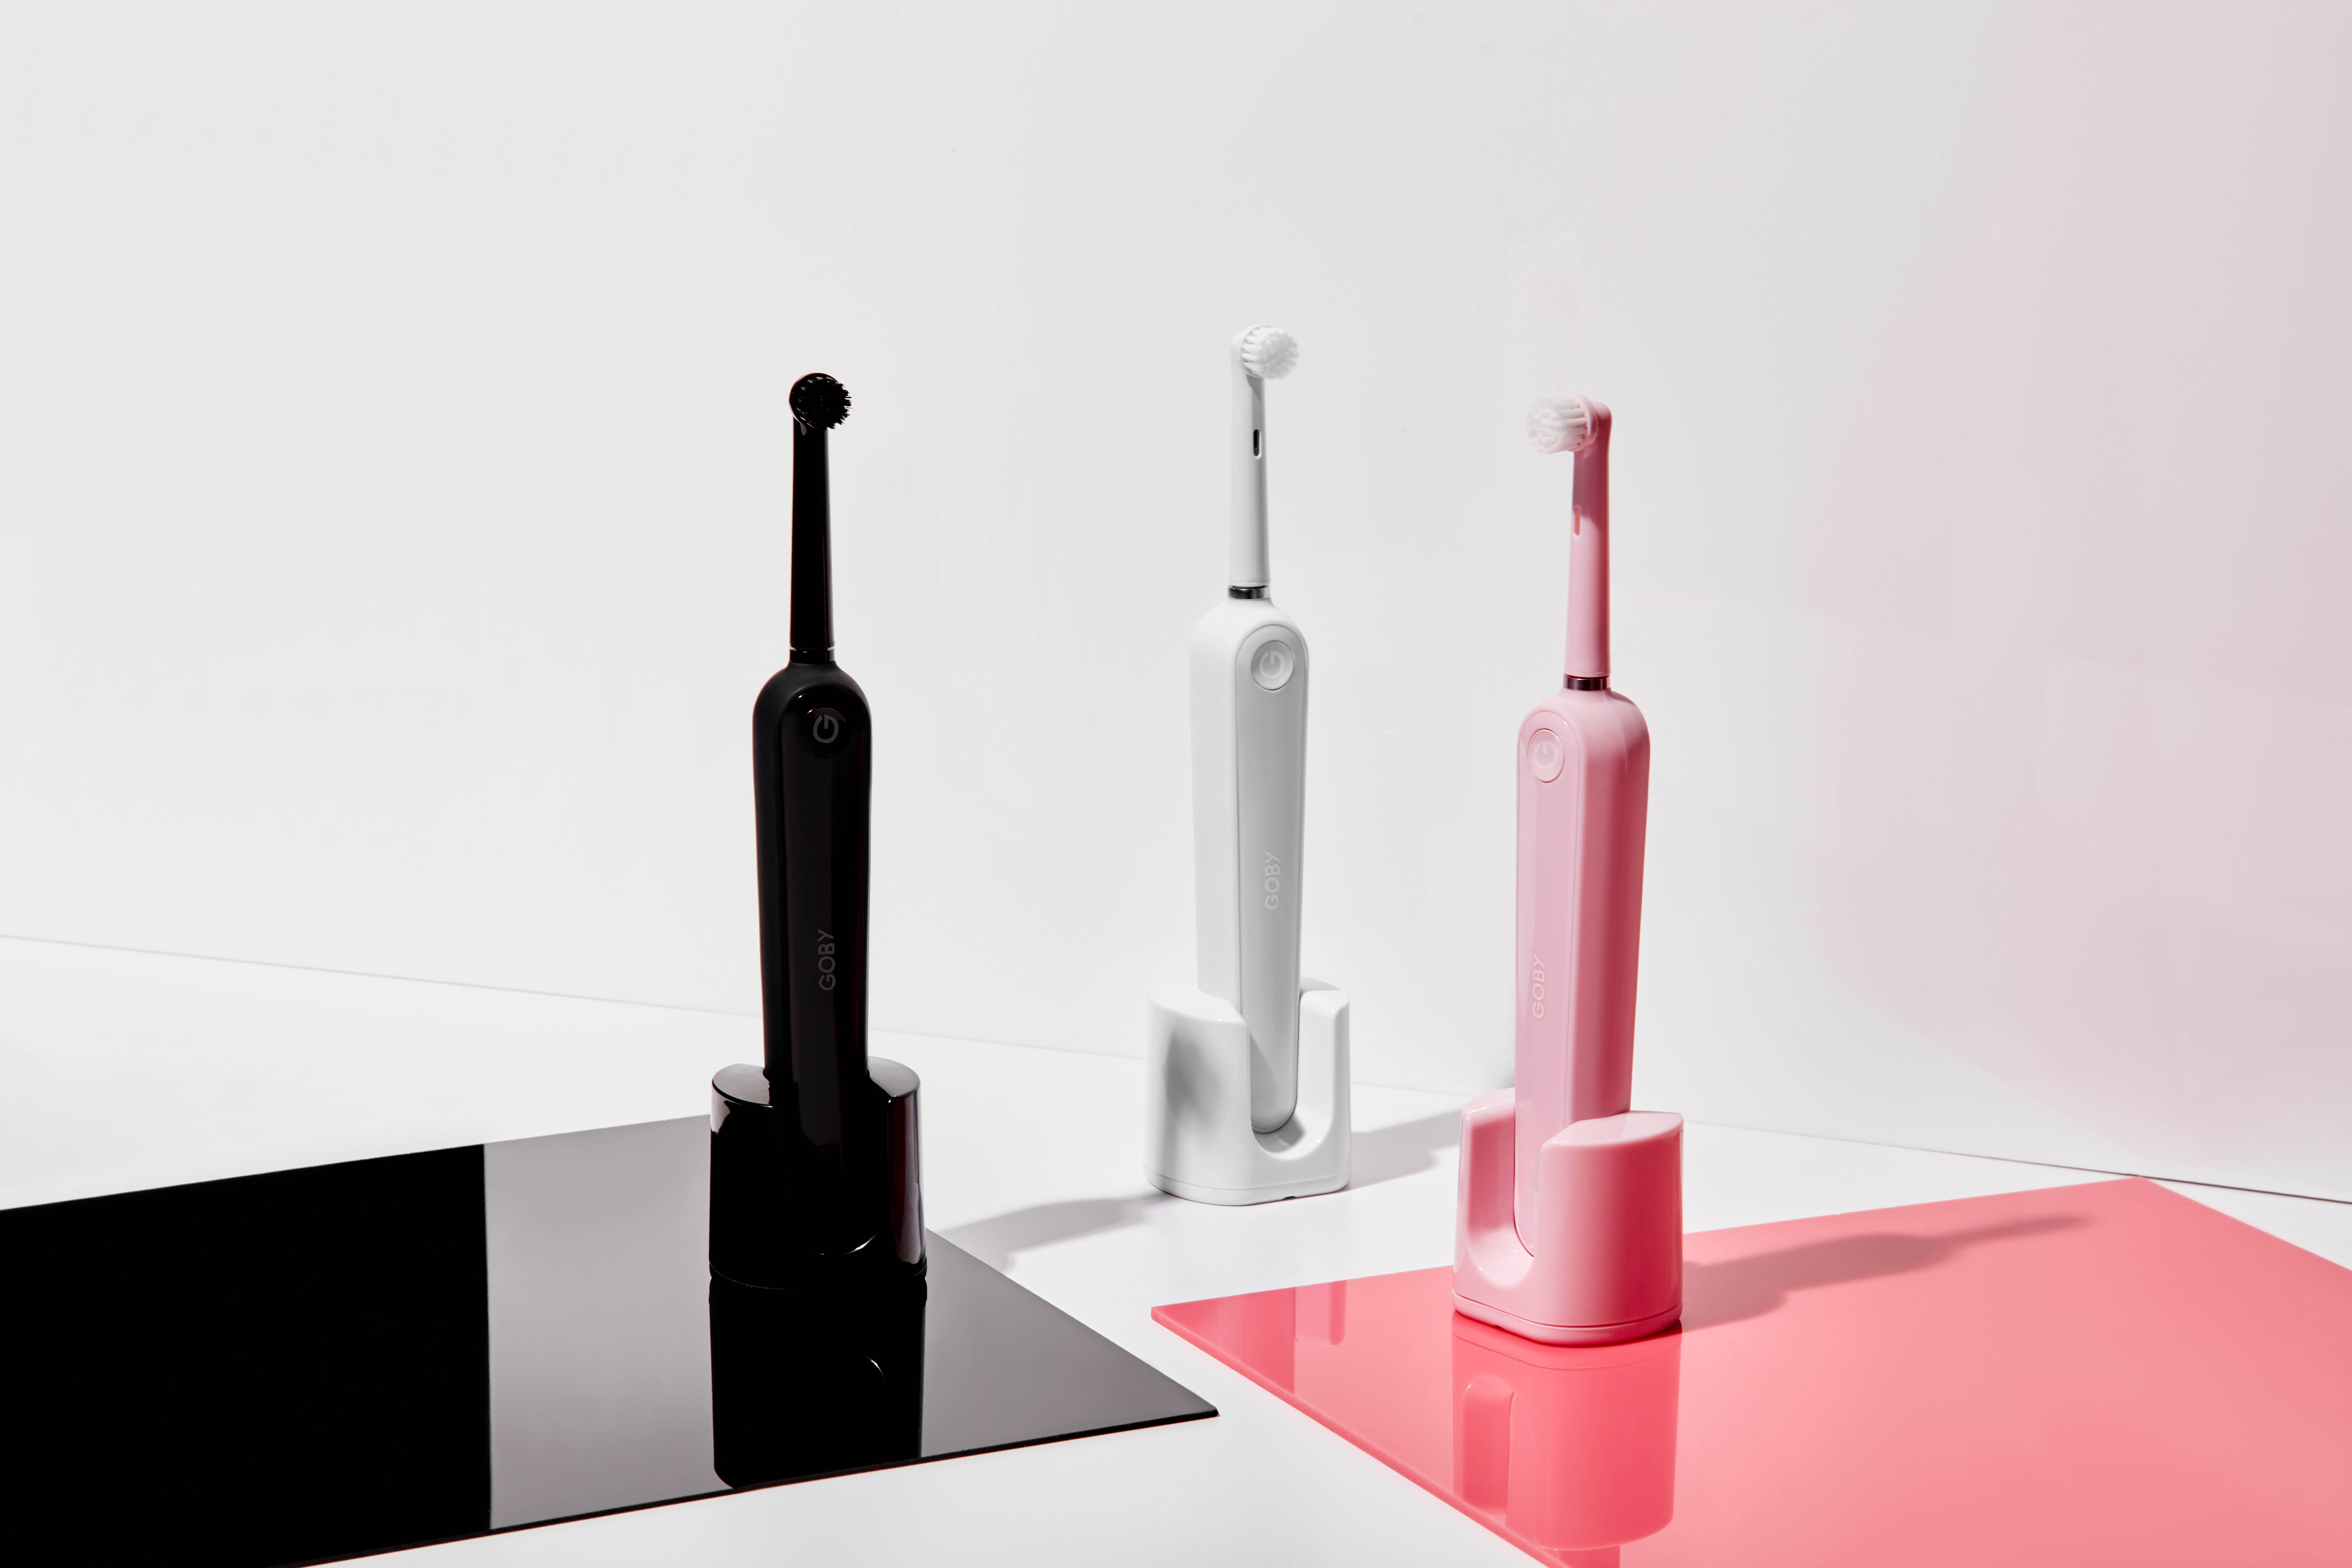 Three electric toothbrushes: one black, one white, and one pink